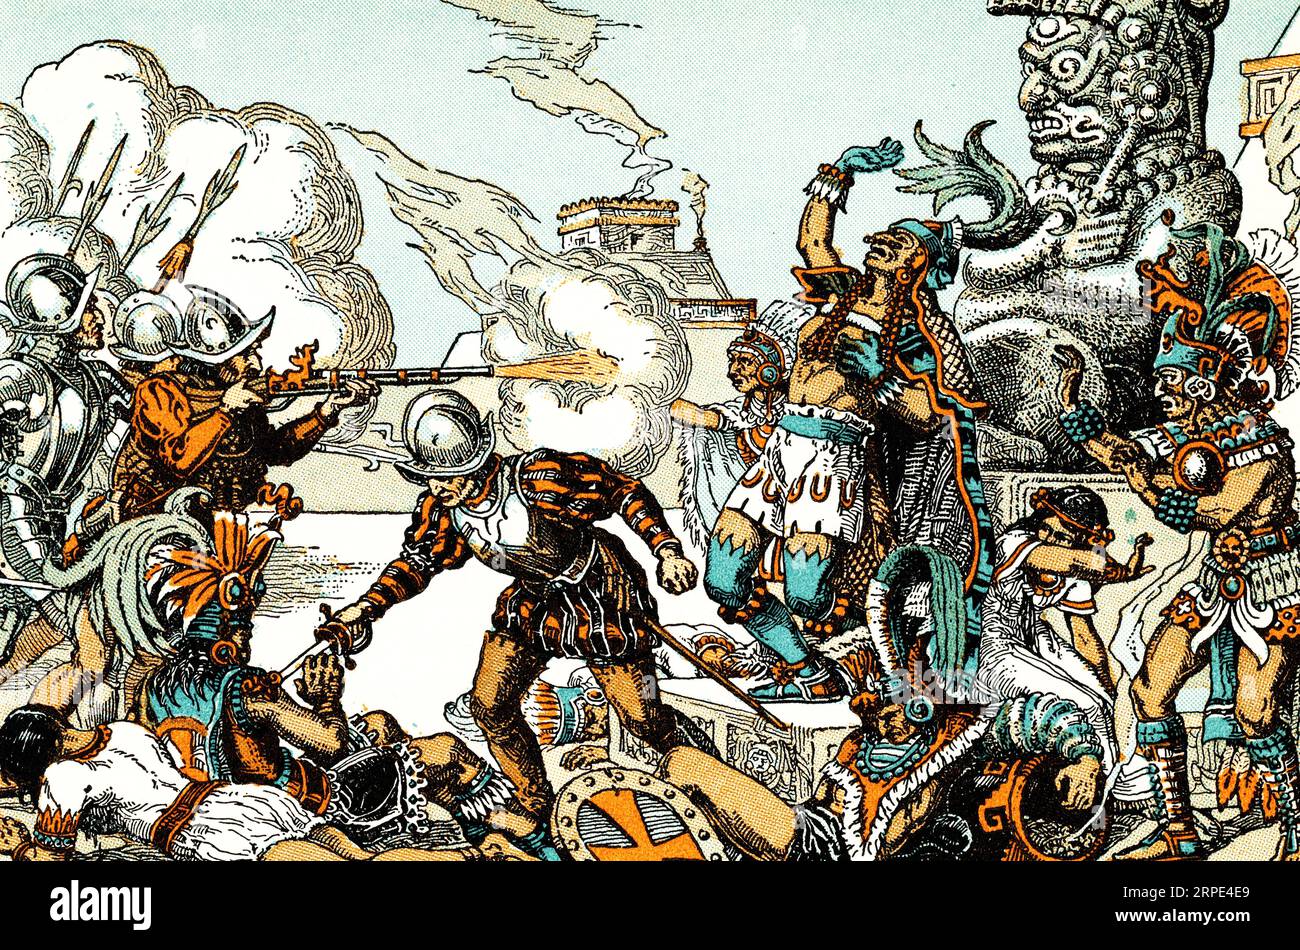 Pedro de Alvarado leading a massacre of Aztec nobles. During Cortés' absence, relations between the Spaniards and their hosts worsened, and Pedro de Alvarado (c1485-1541), led a massacre of Aztec nobles and priests observing a religious festival. Stock Photo